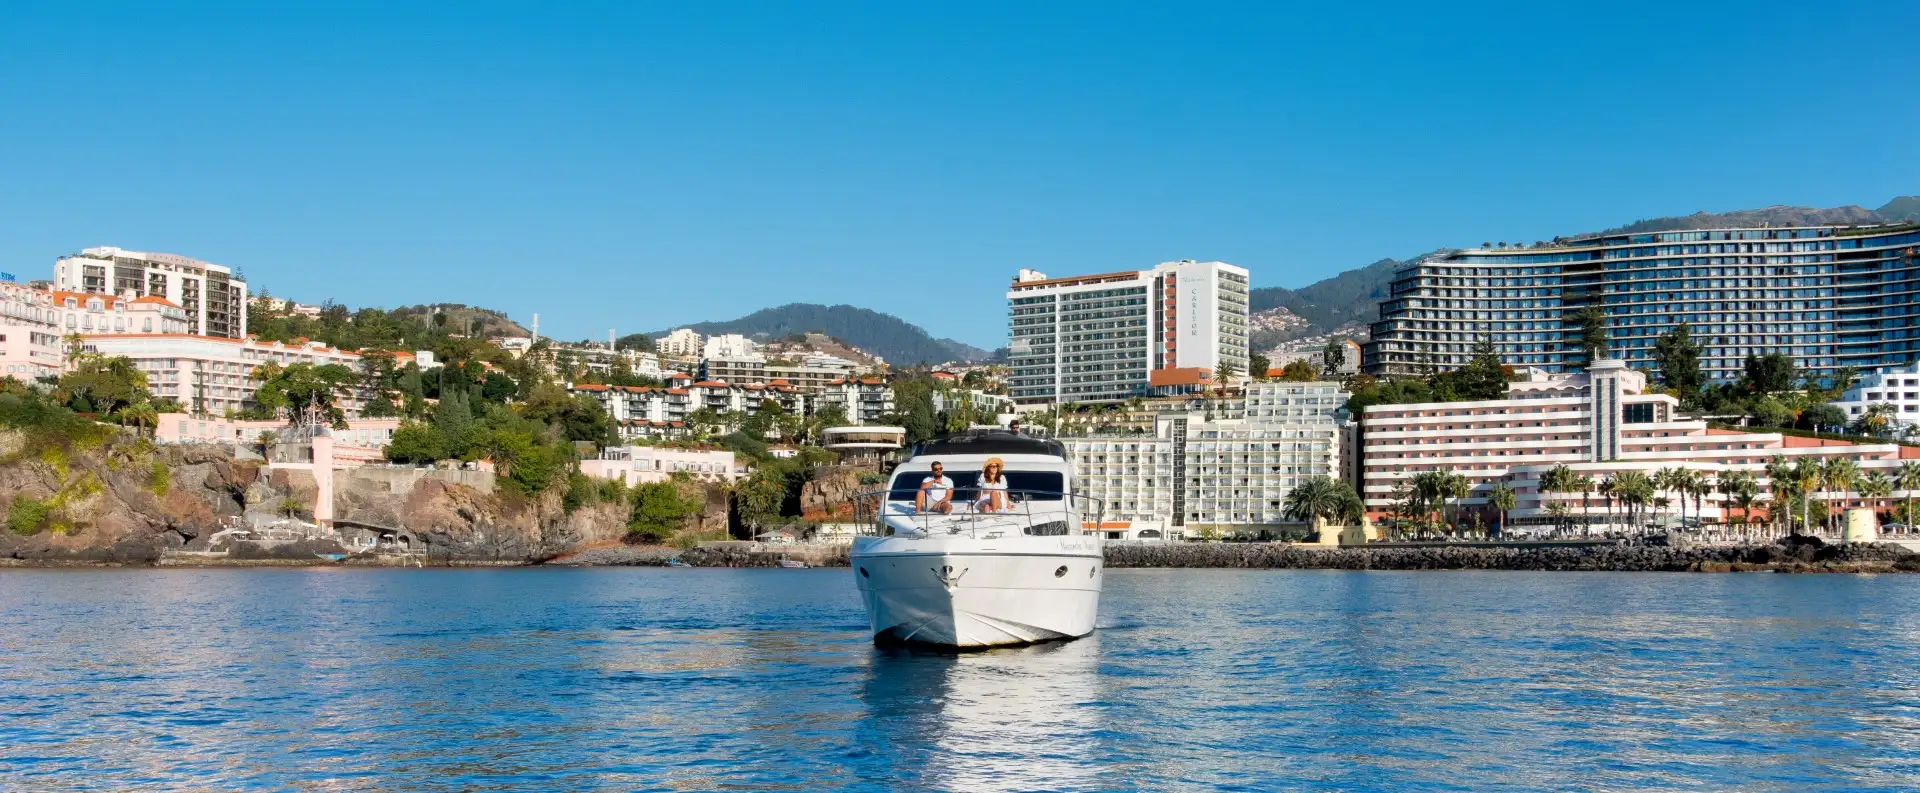 Yacht charter from Funchal
